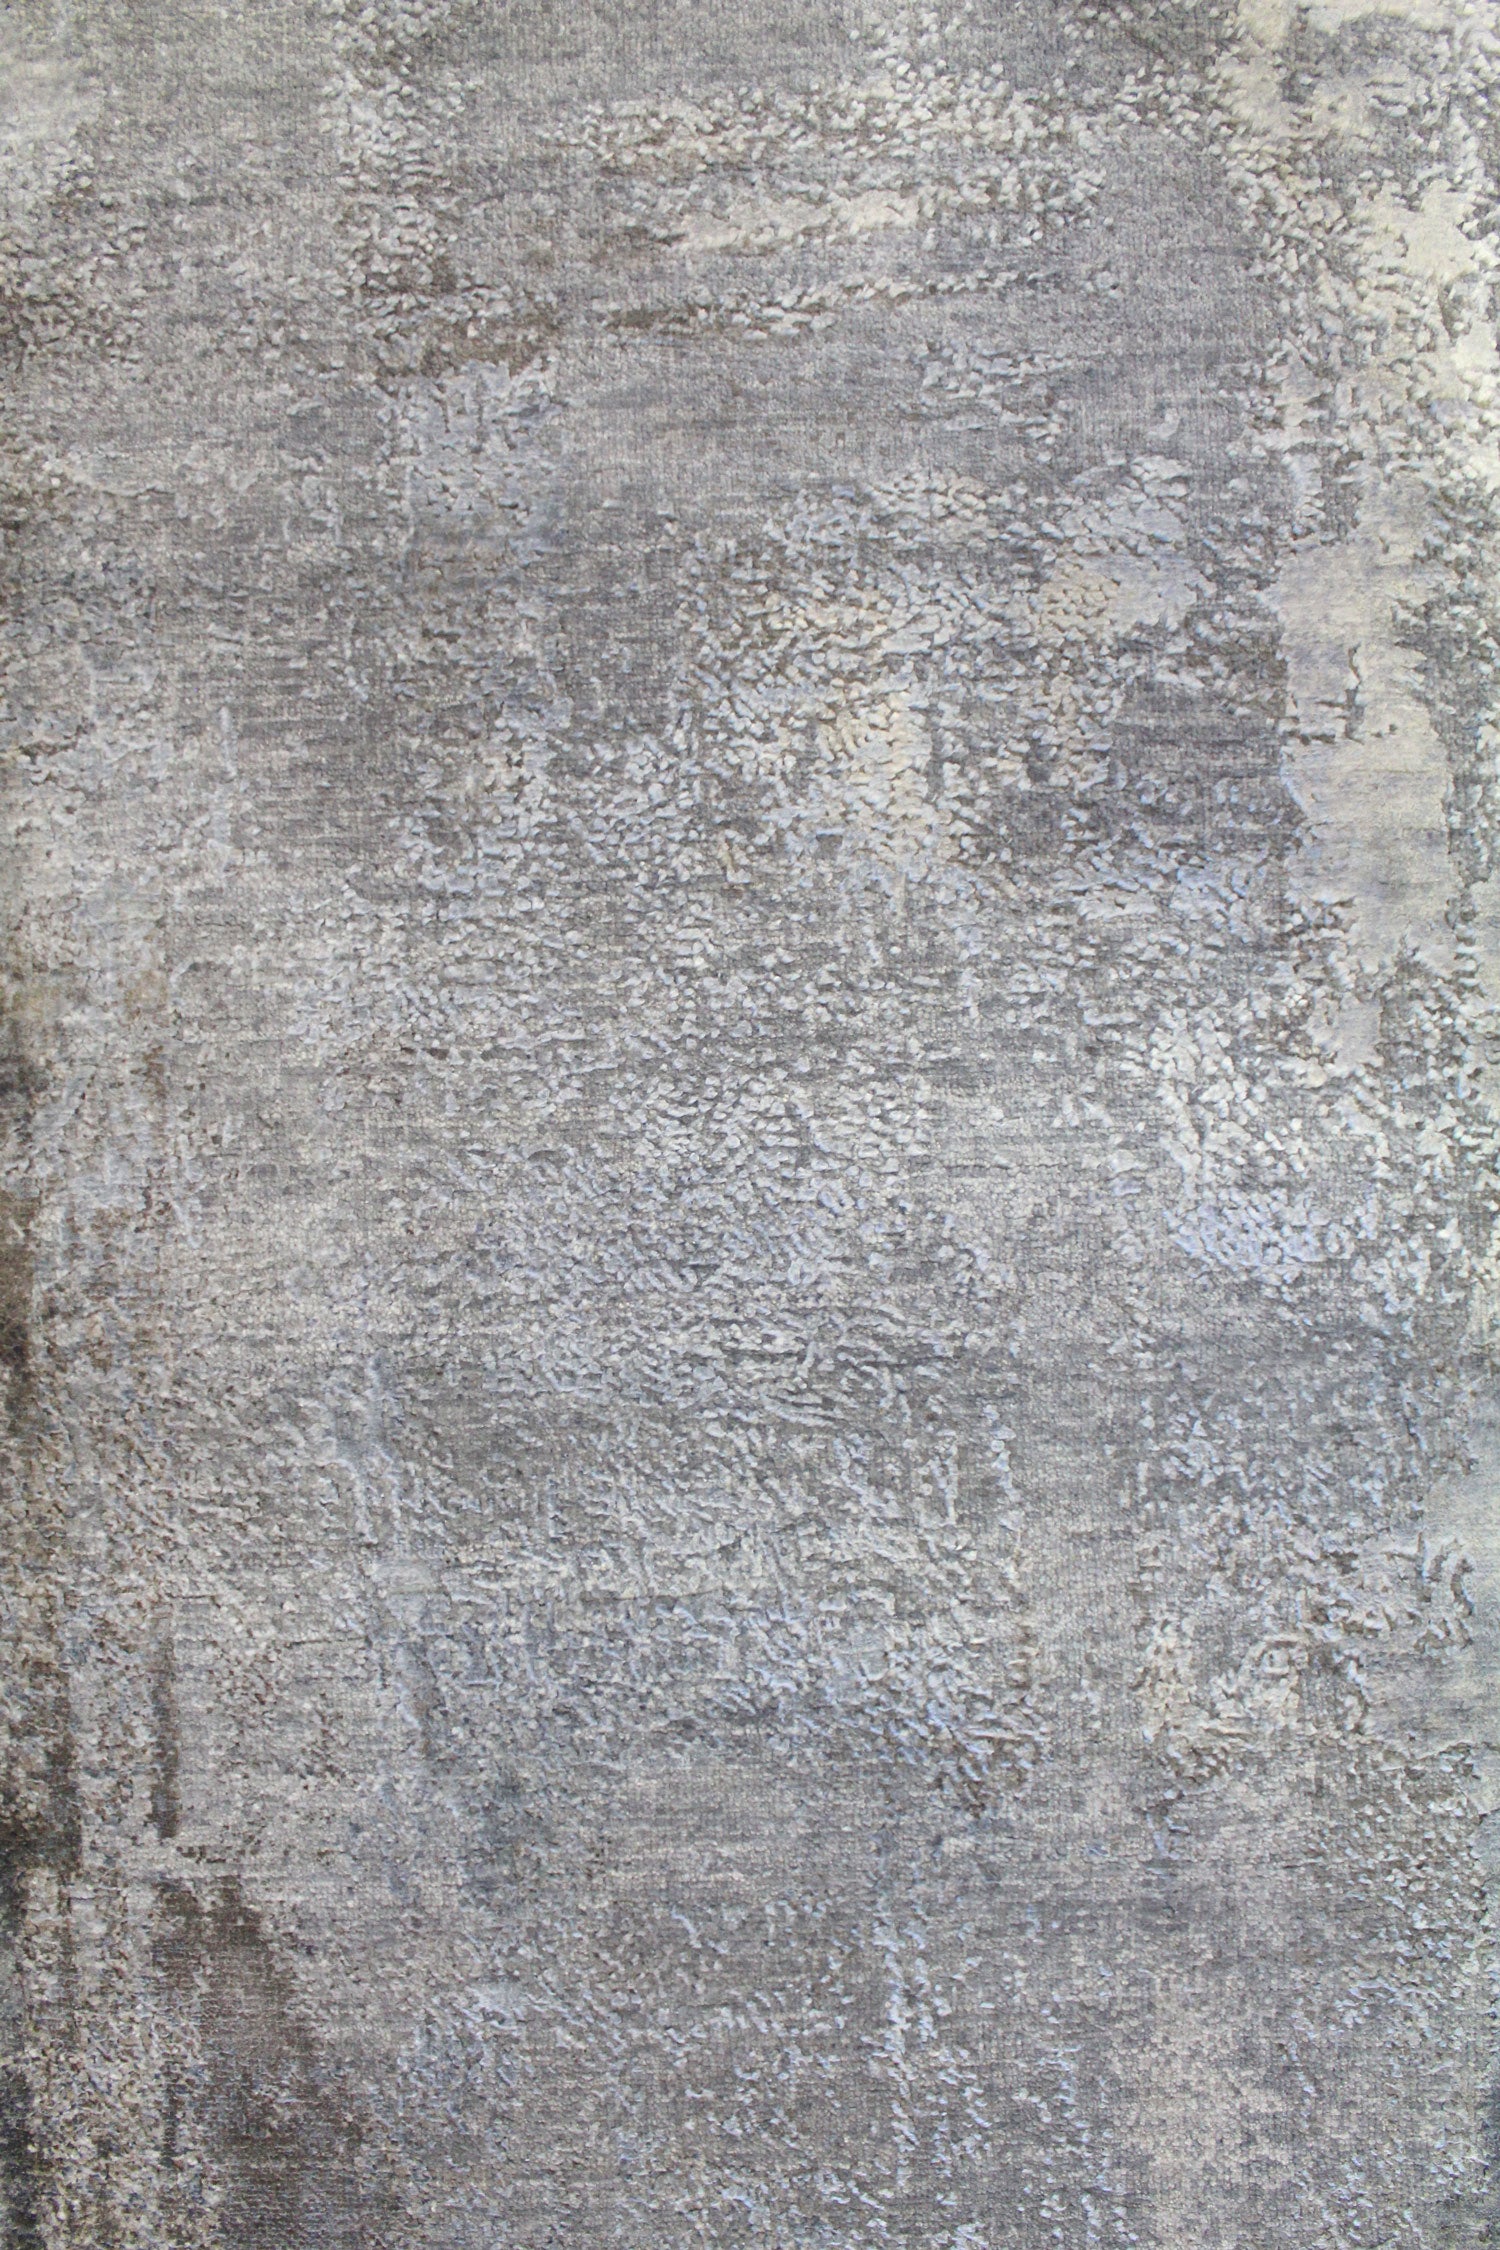 Weathered Handwoven Contemporary Rug, J59397